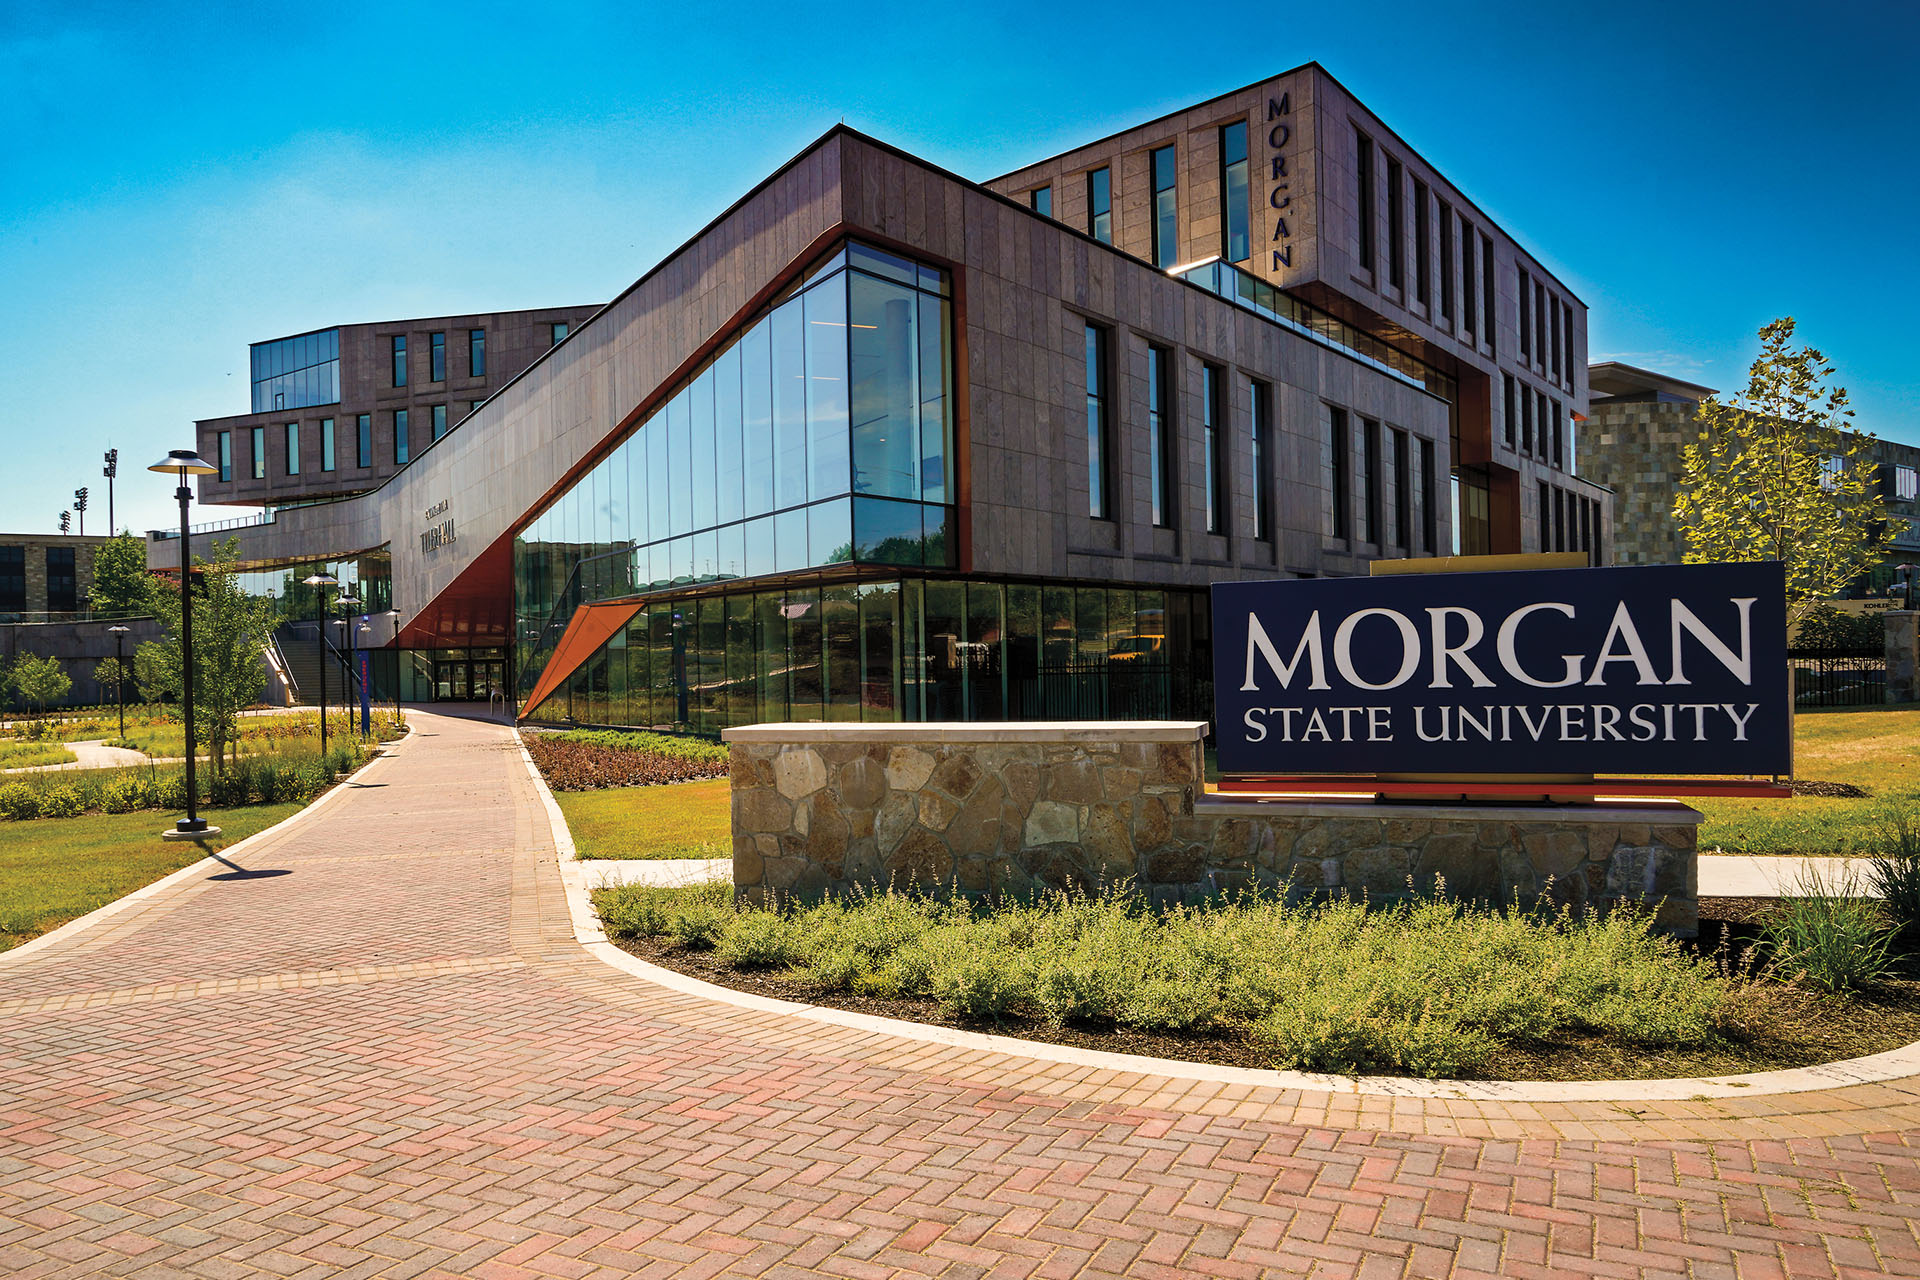 U.S. Department of Education Awards Morgan State University $400K Research Grant to Study Trauma Impacts On Student Performance, Success